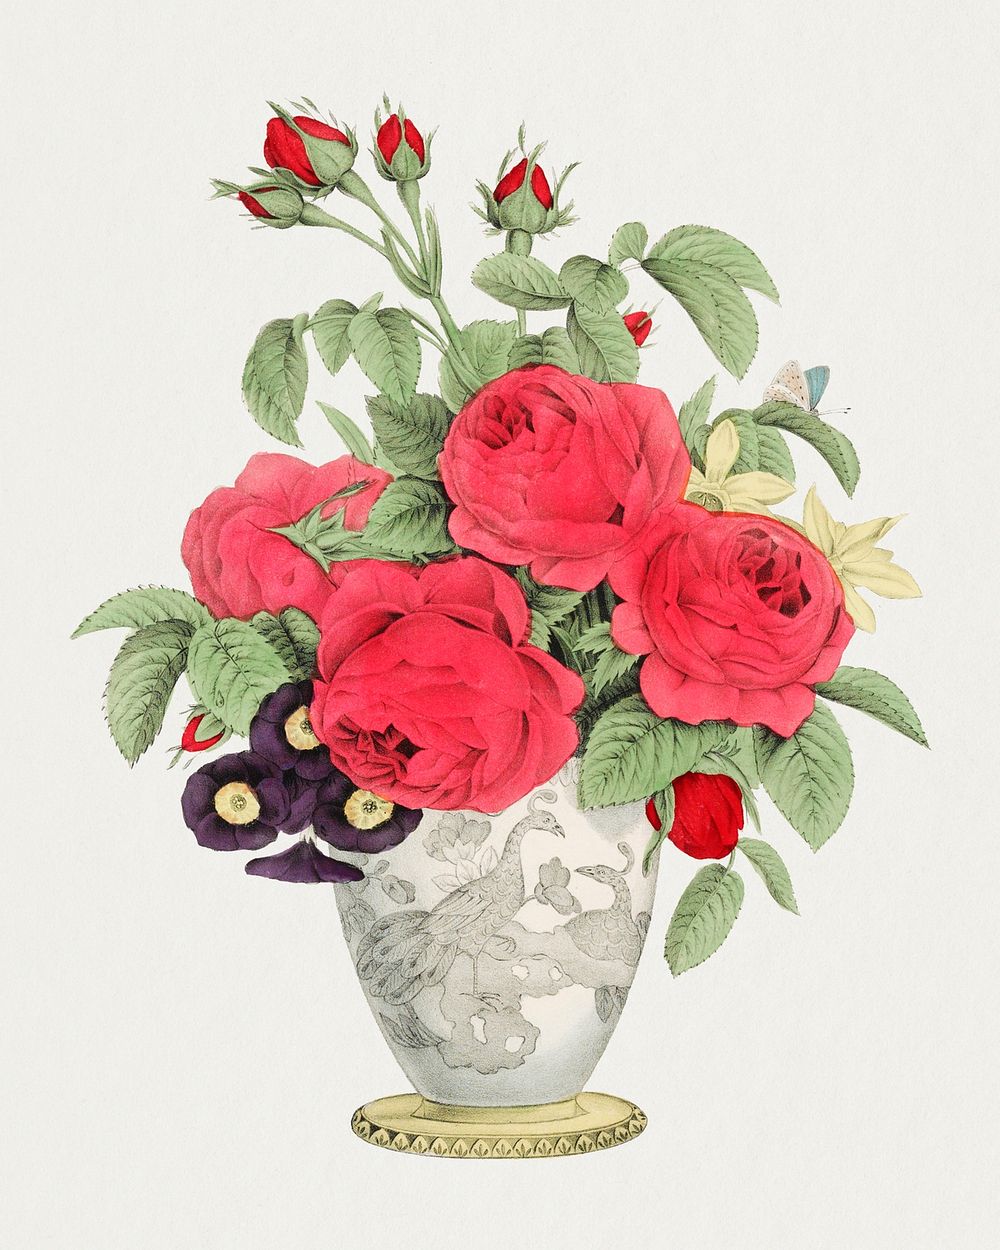 Rose bouquet illustration, antique botanical art psd, remix from the artwork of Nathaniel Currier